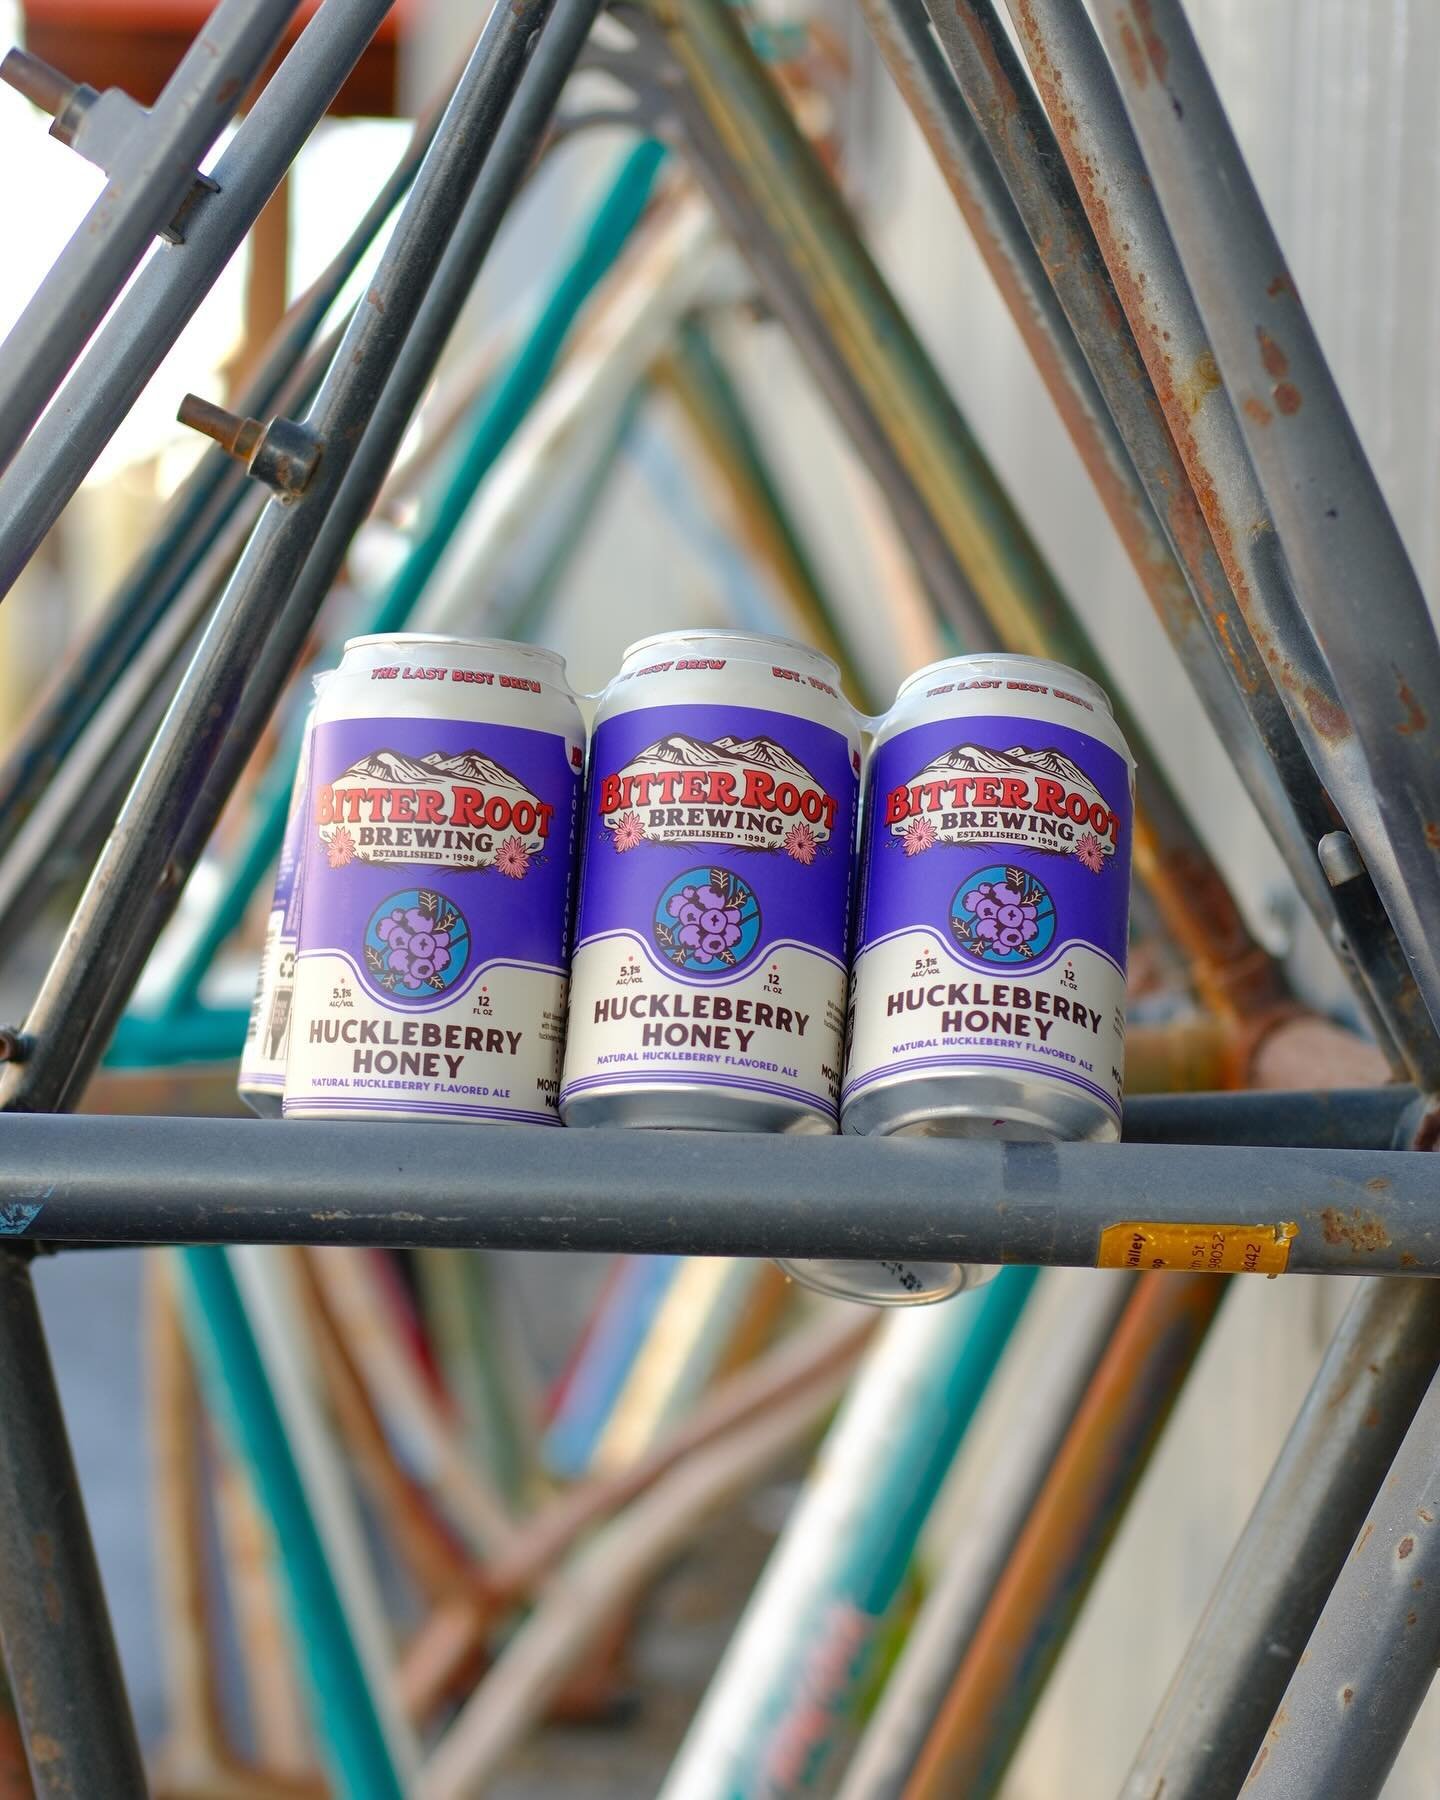 Huckleberry Honey is finally back! To celebrate we are giving $1 off drafts and 6 packs!
.
.
.
#huckleberryhoney #summersippin #thewaitisover #comegetsome #hamtownsfinest #illbeyourhuckleberry #montanacraftbeer #canihaveahuckleberry #drinklocalbeer